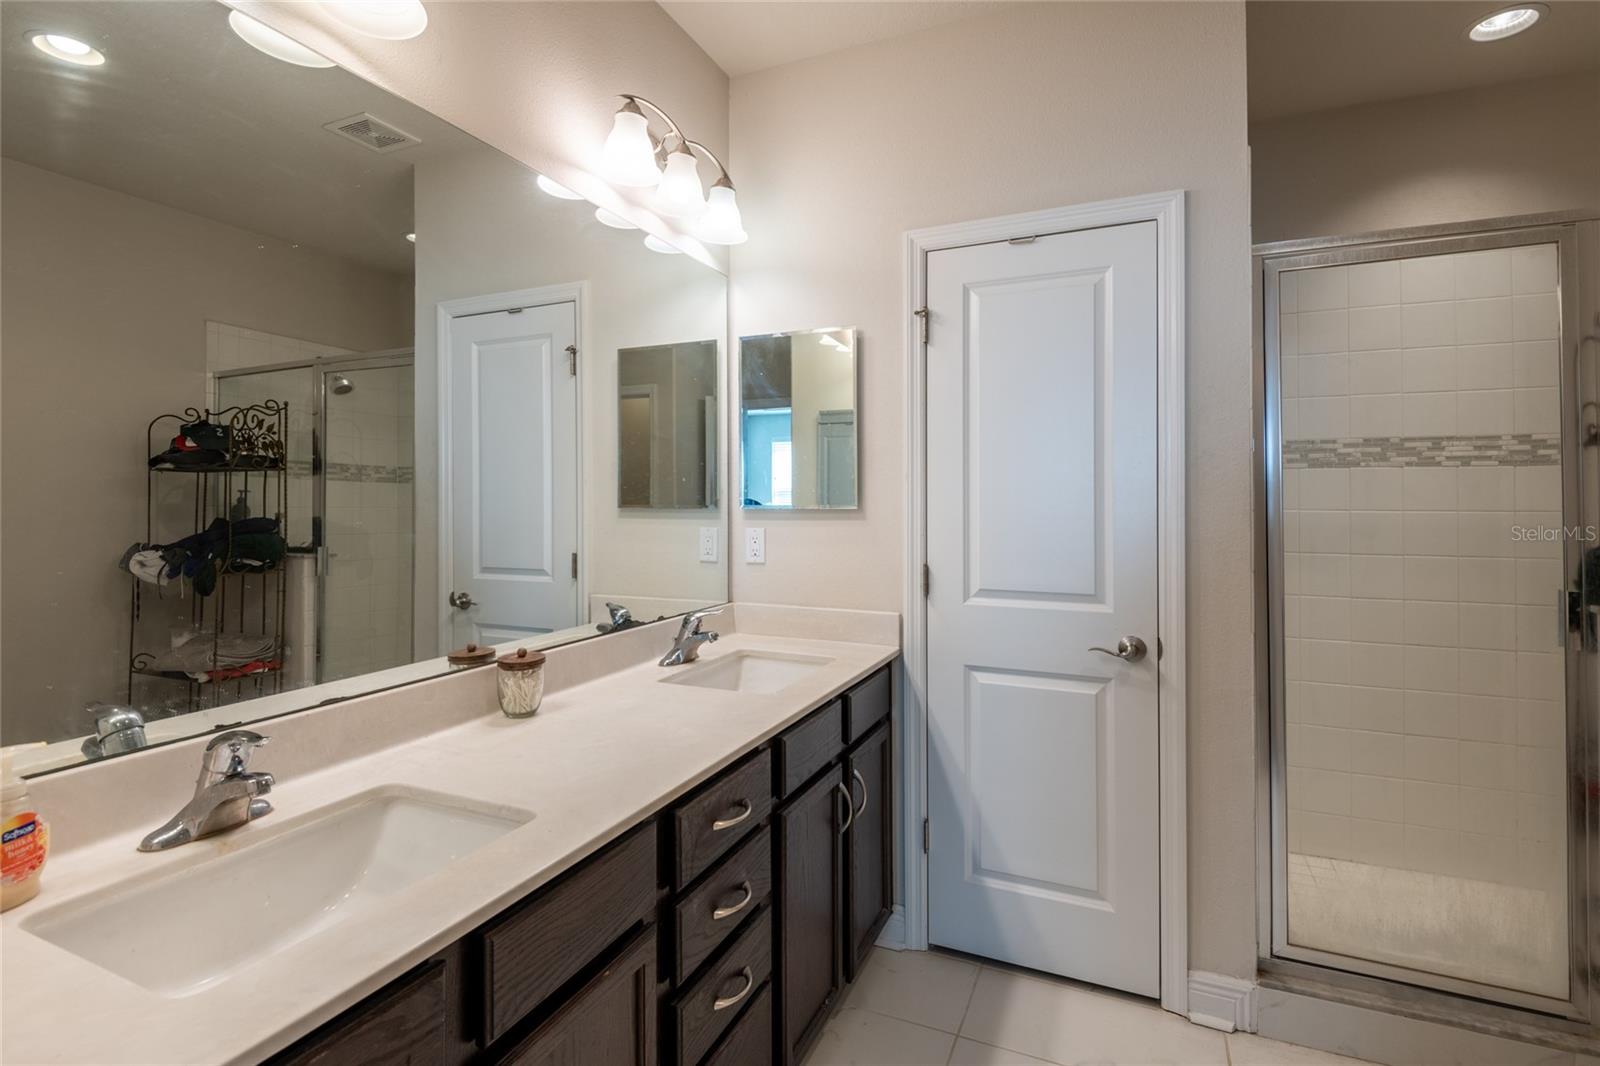 Primary bathroom- Quartz countertops with dual sinks. Also, has dual walk-in closets.